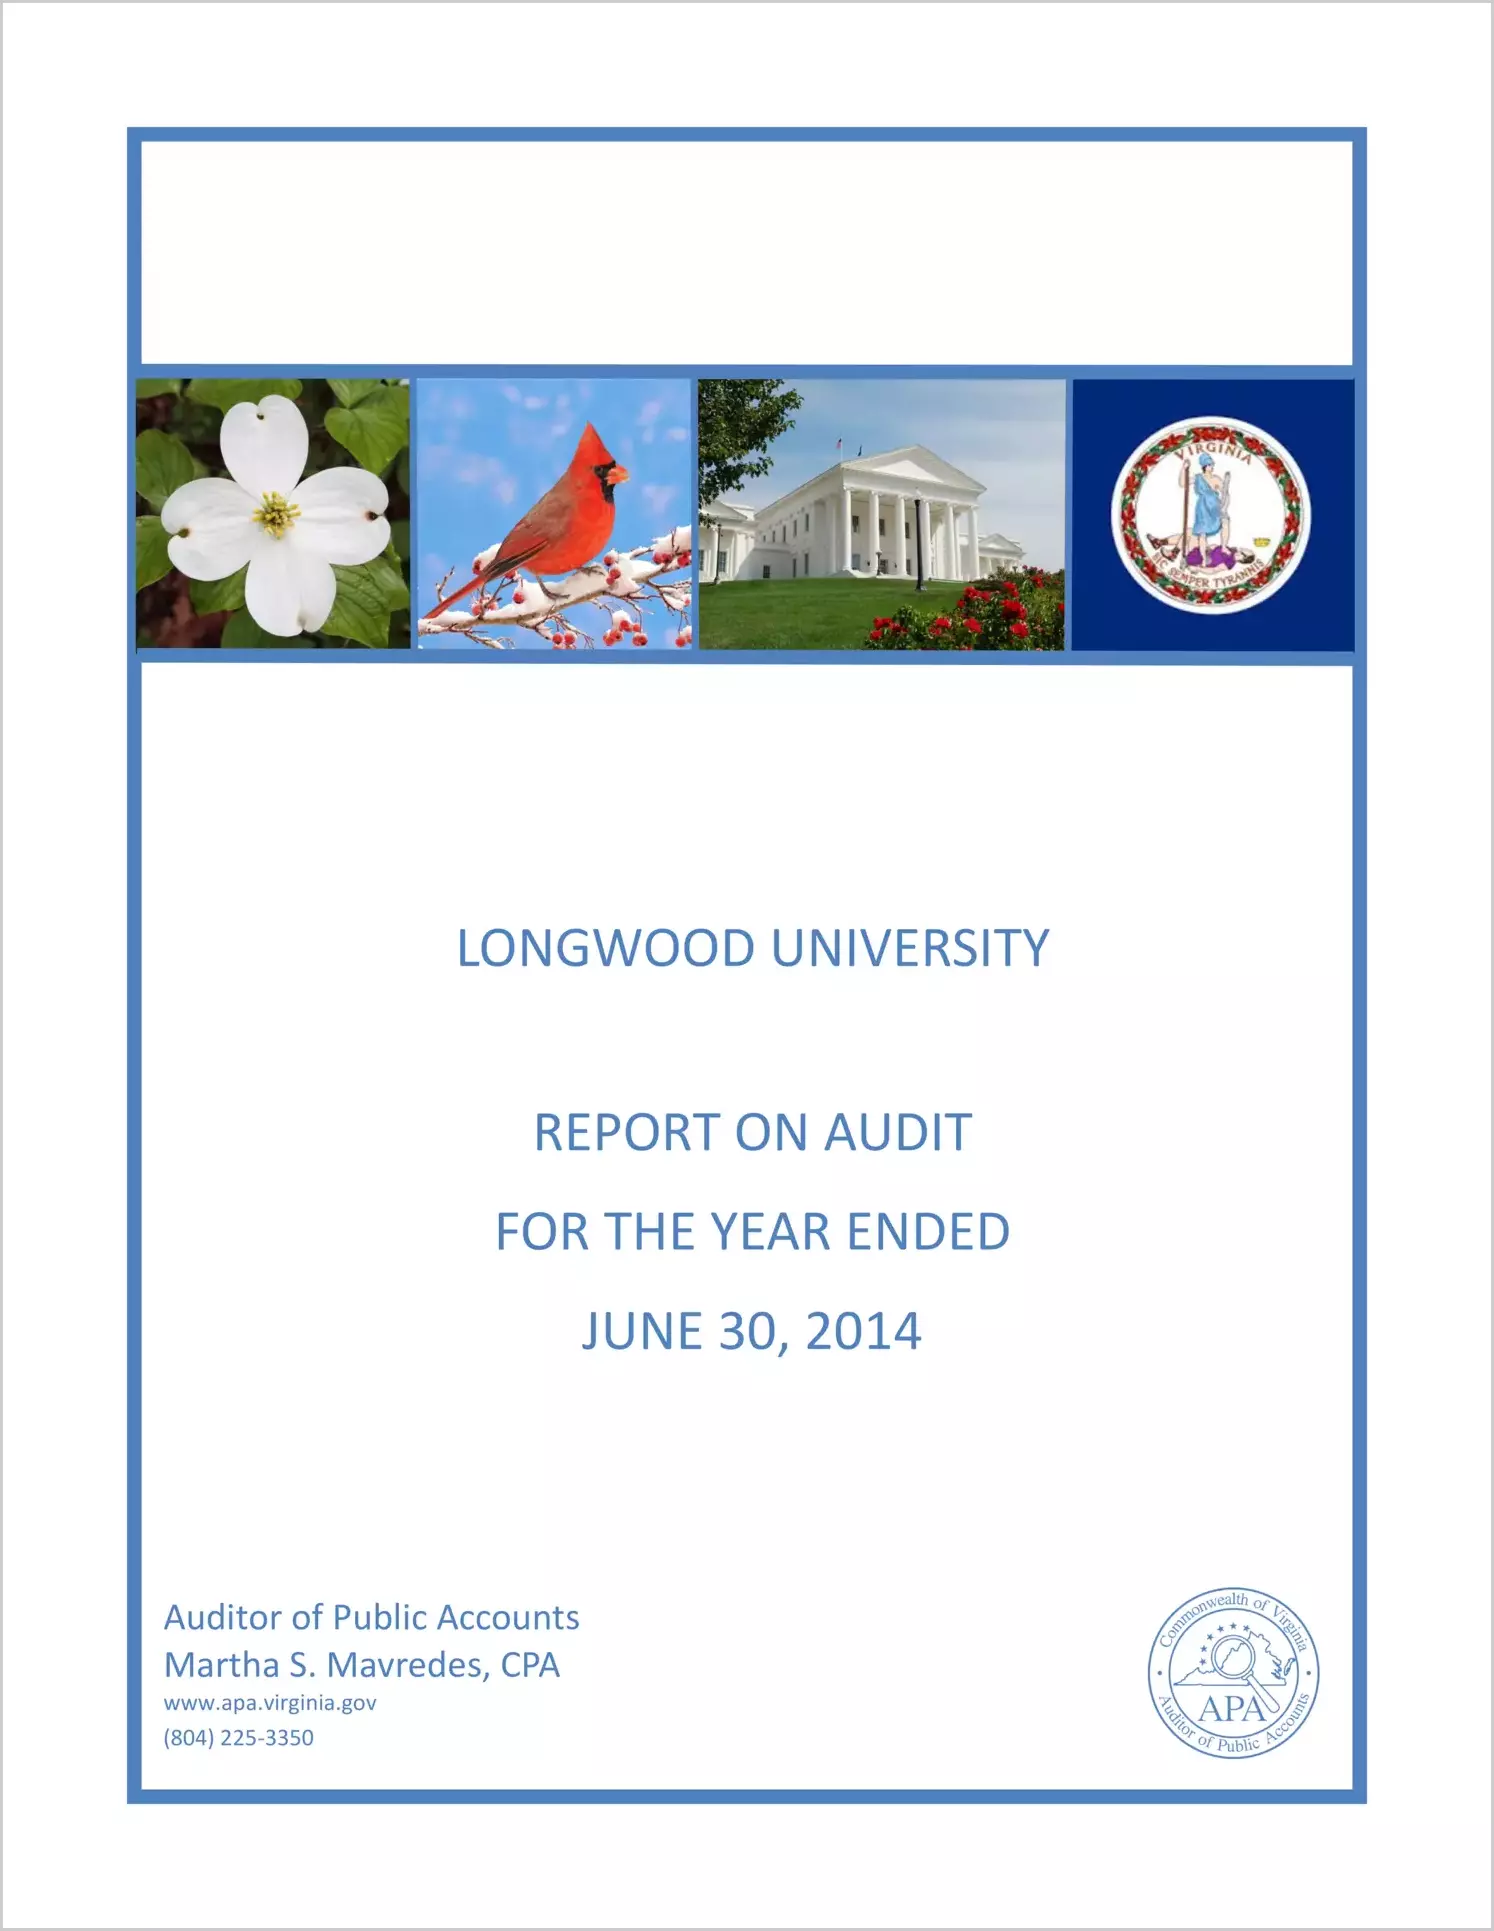 Longwood University report on audit for the year ended June 30, 2014